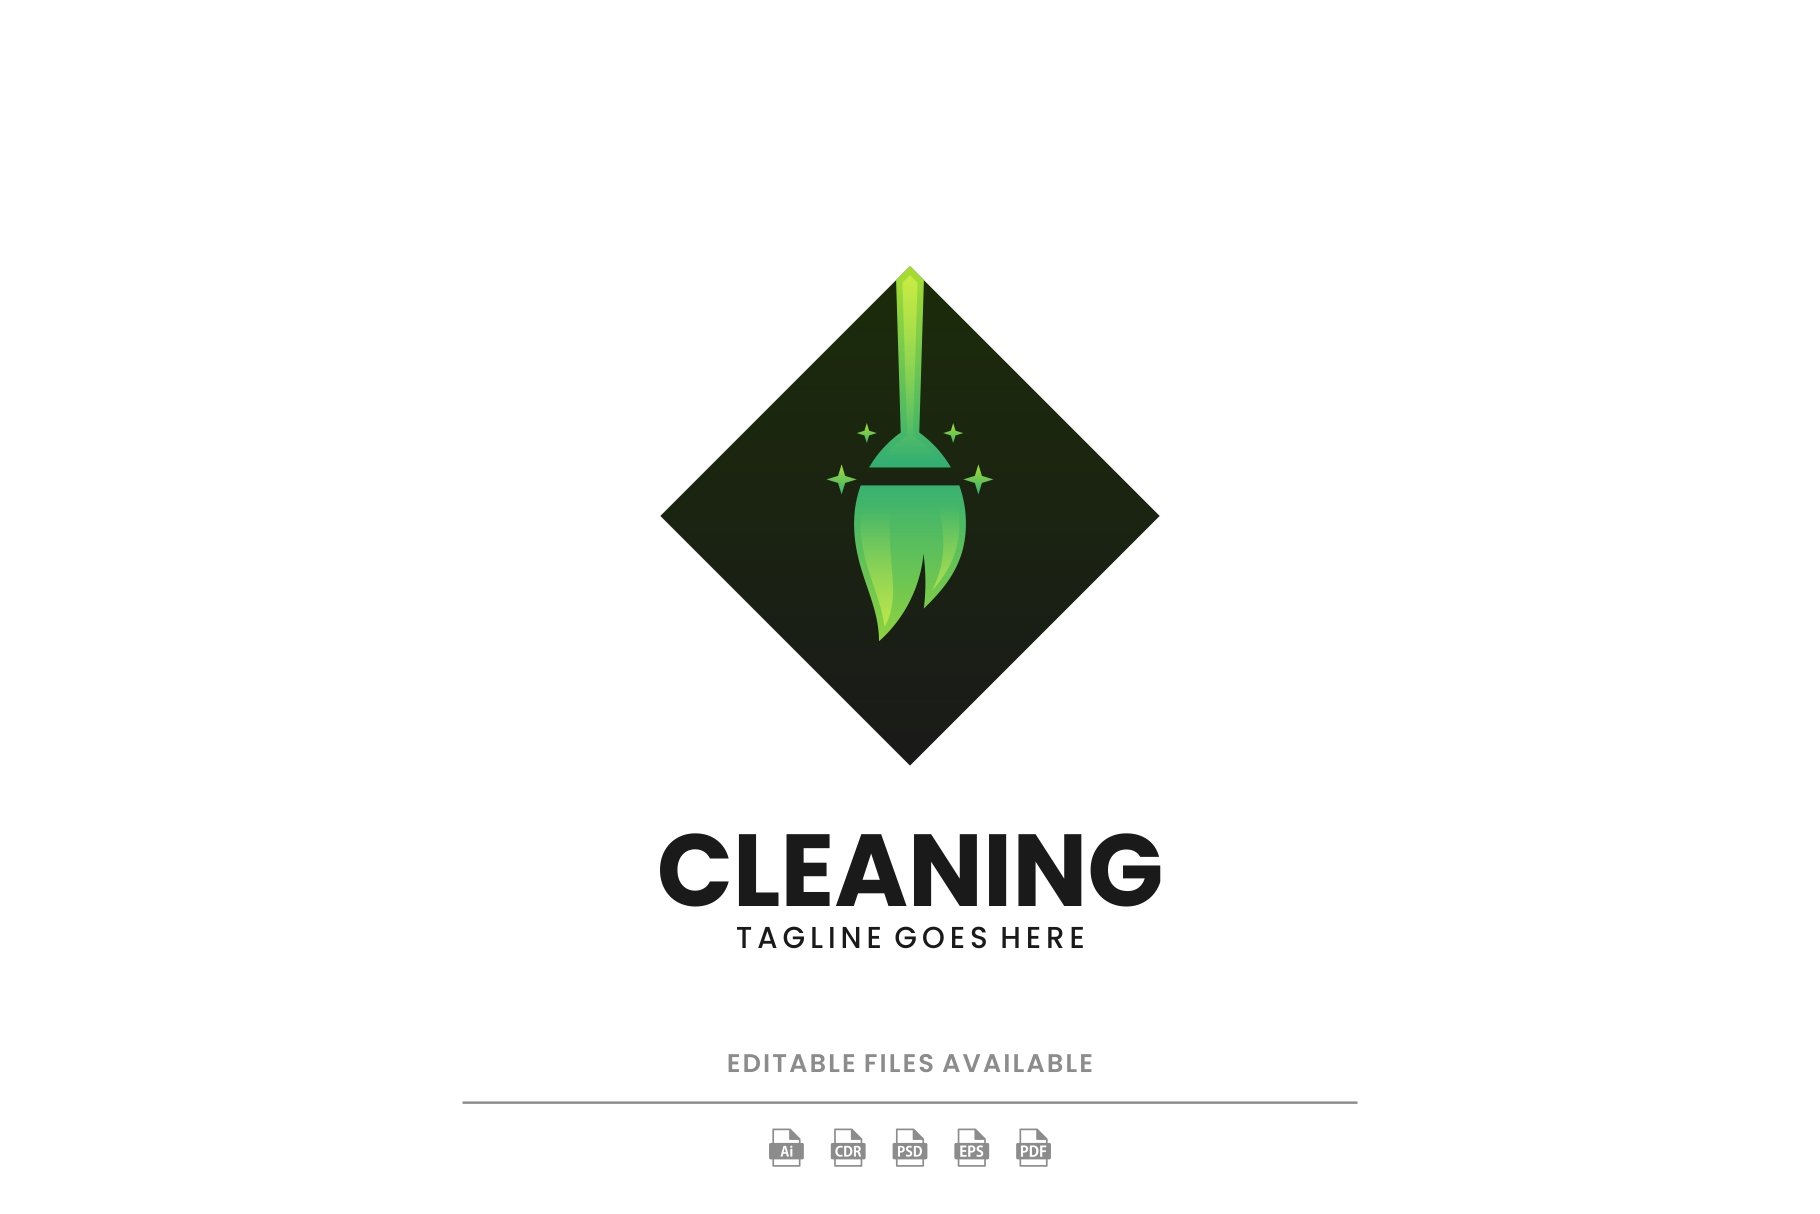 Cleaning Gradient Logo cover image.